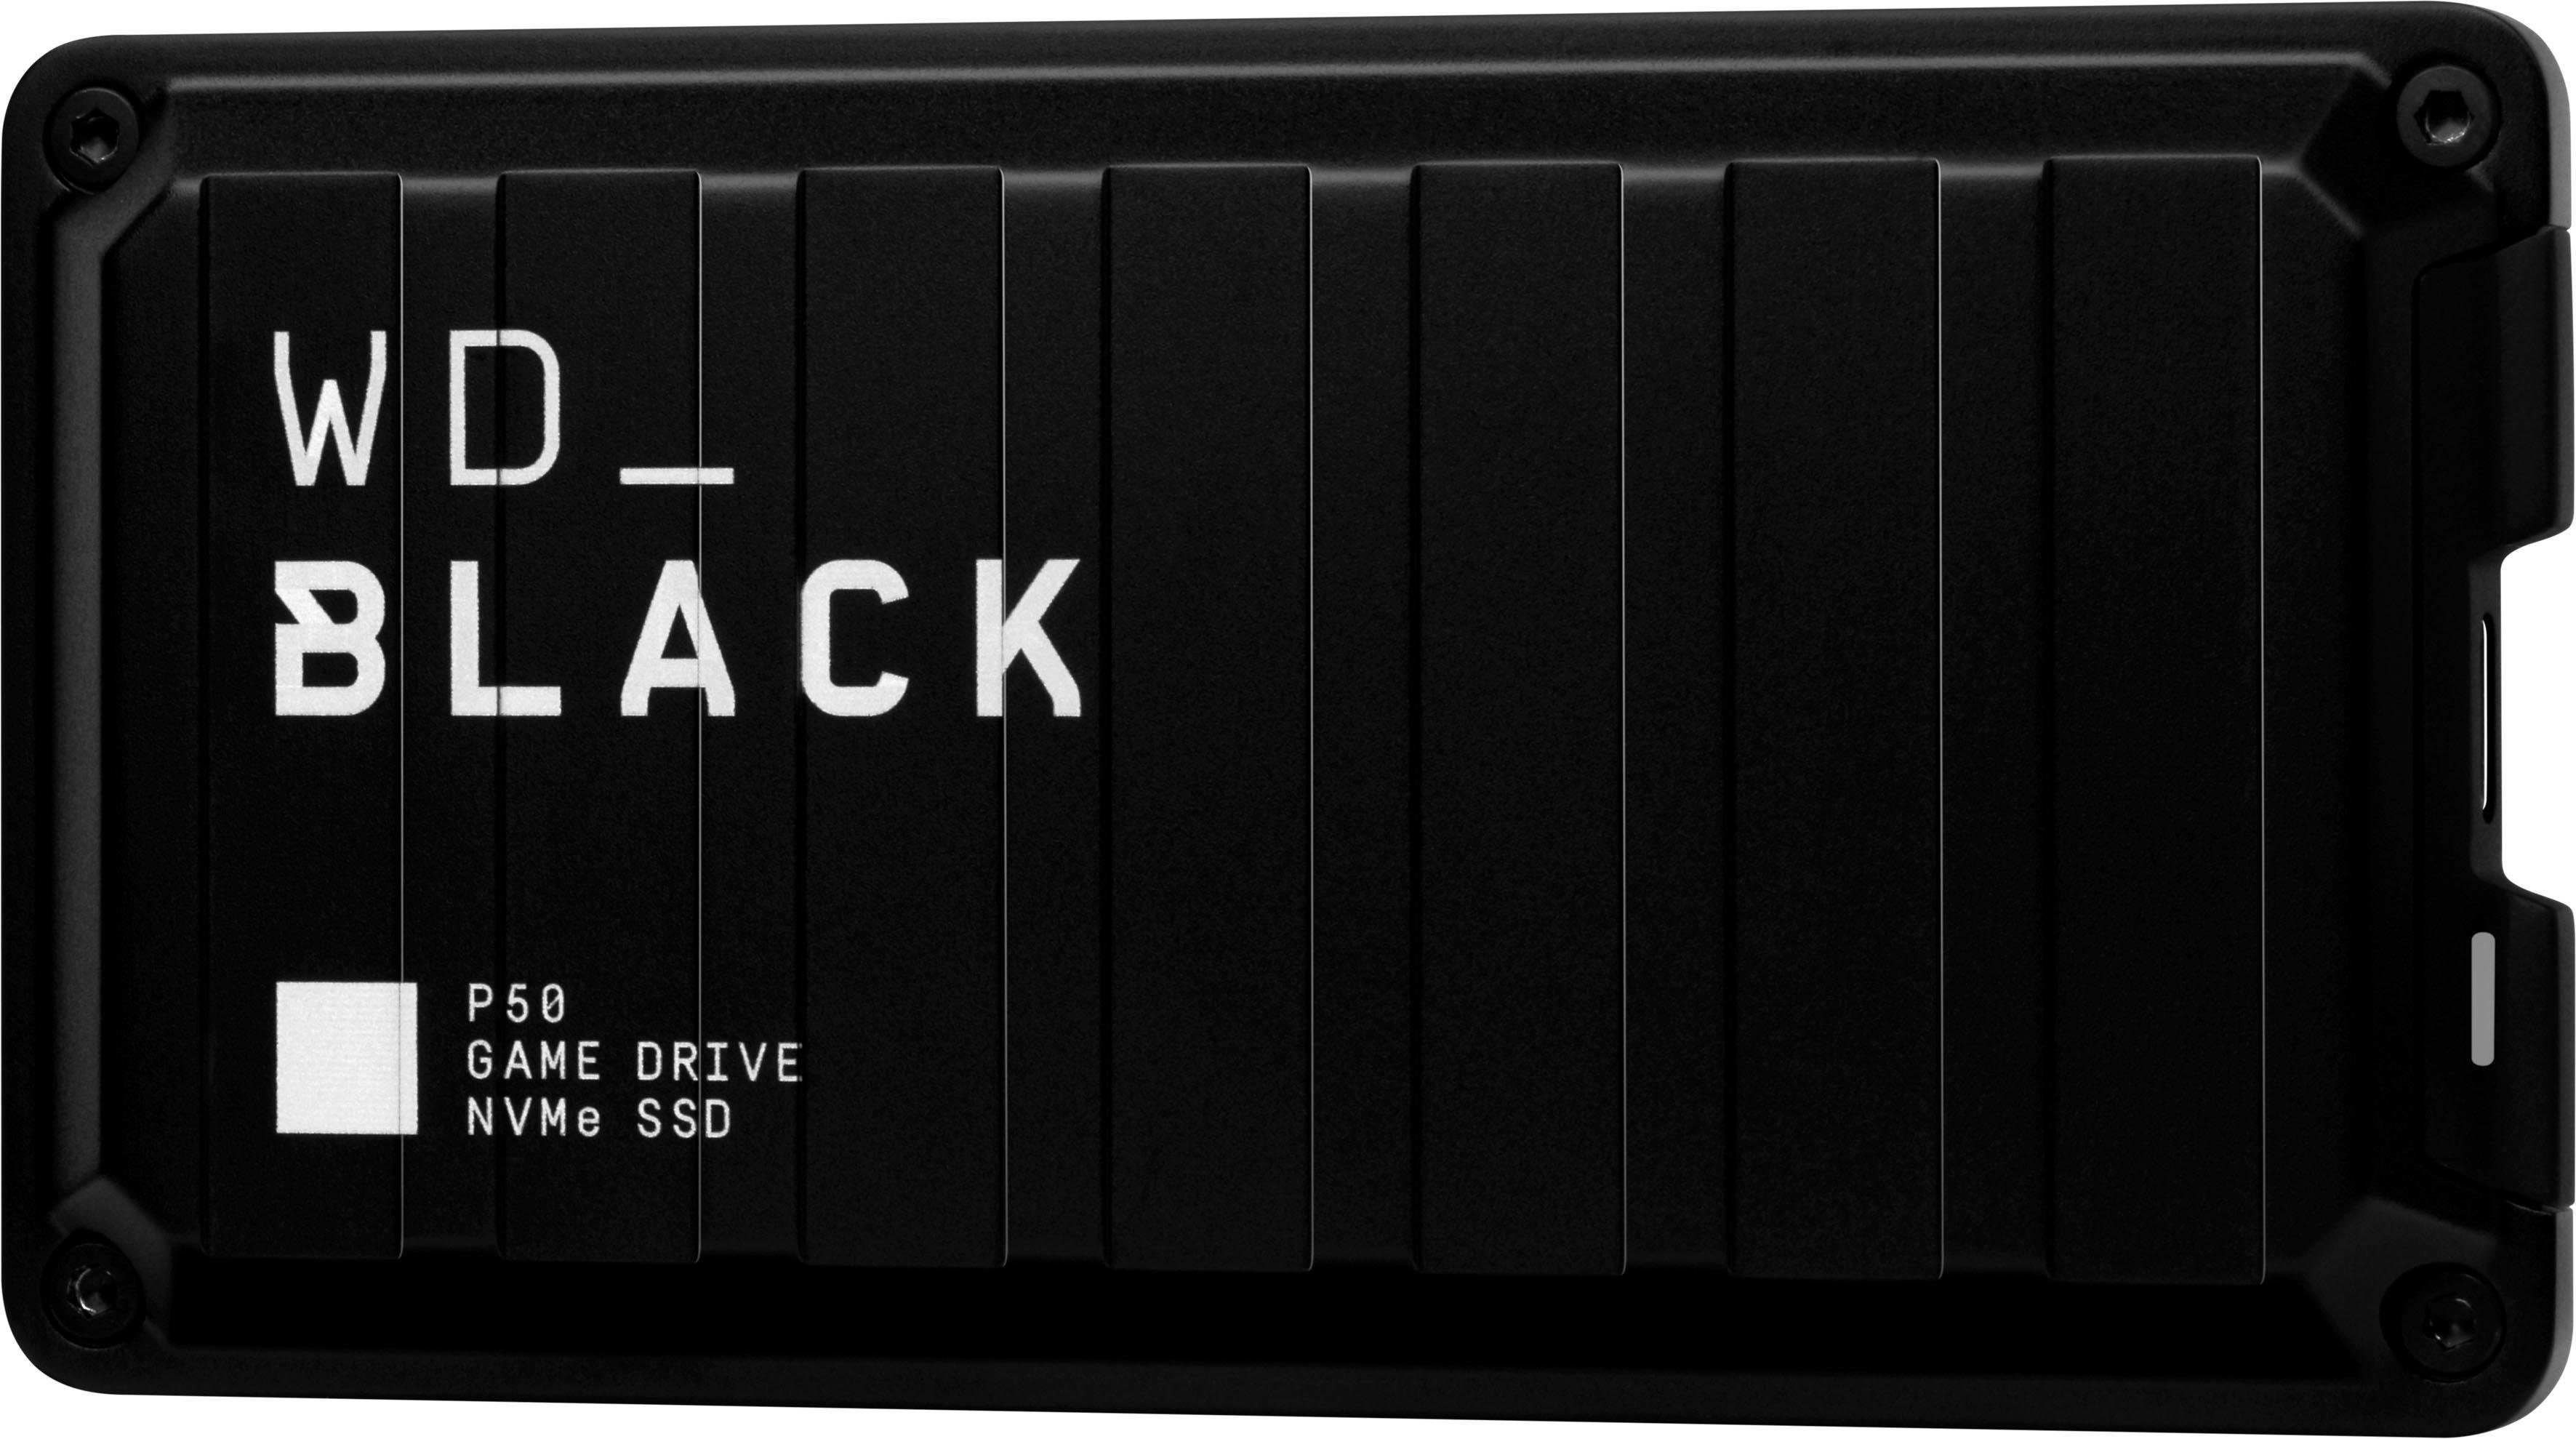 WD_Black externe Gaming-SSD »P50 Game Drive«, Anschluss USB 3.2